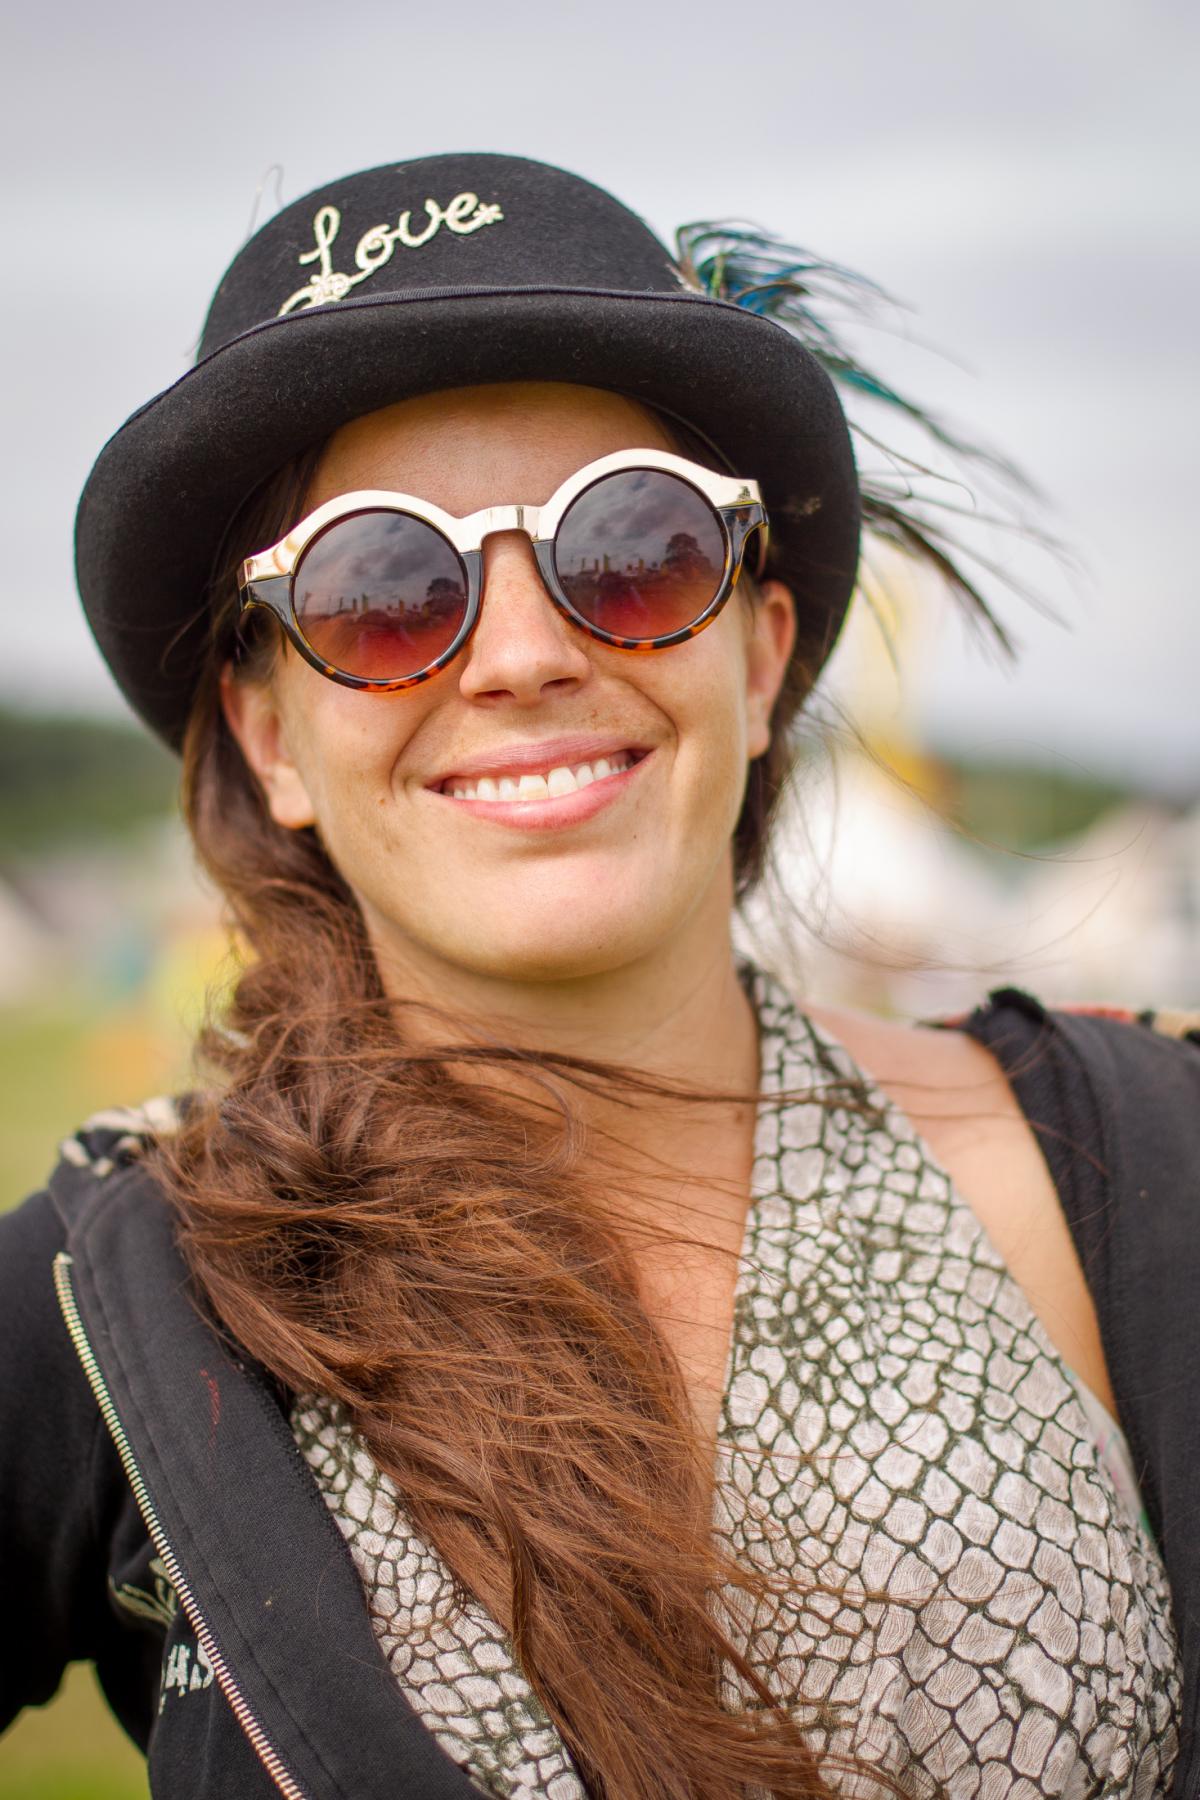 Camp Bestival 2014 - Photo courtesy of Camp Bestival